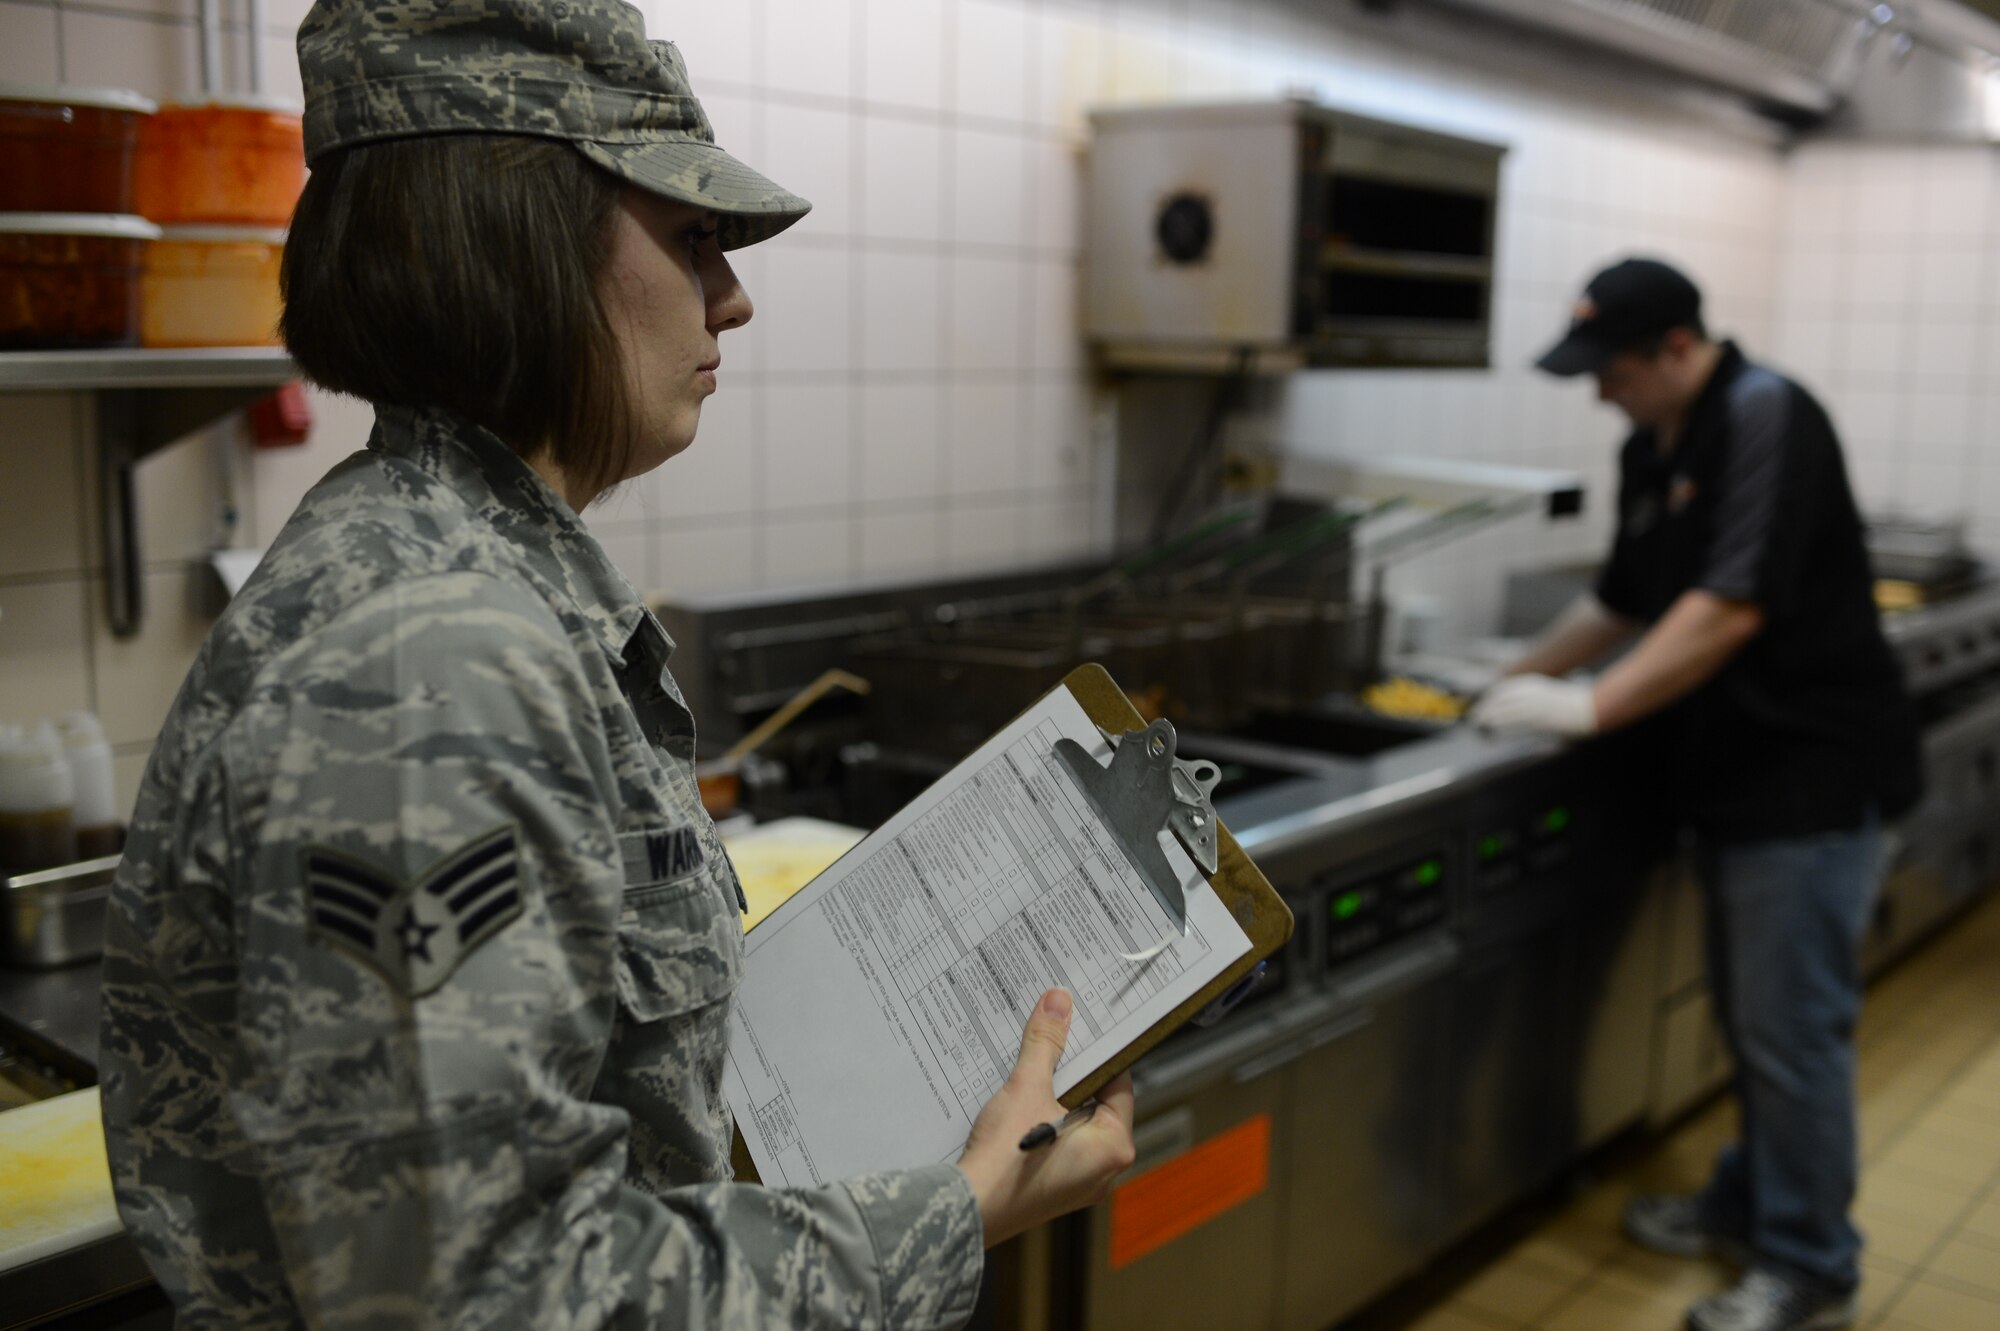 U.S. Air Force Senior Airman Misty Warner, 52nd Aerospace Medicine Squadron public health technician from Oglesby, Texas, inspects a food establishment at Spangdahlem Air Base, Germany, March 5, 2014. The public health office manages and performs public health activities and programs in support of the Aerospace Medicine Enterprise. (U.S. Air Force photo by Senior Airman Gustavo Castillo/Released) 